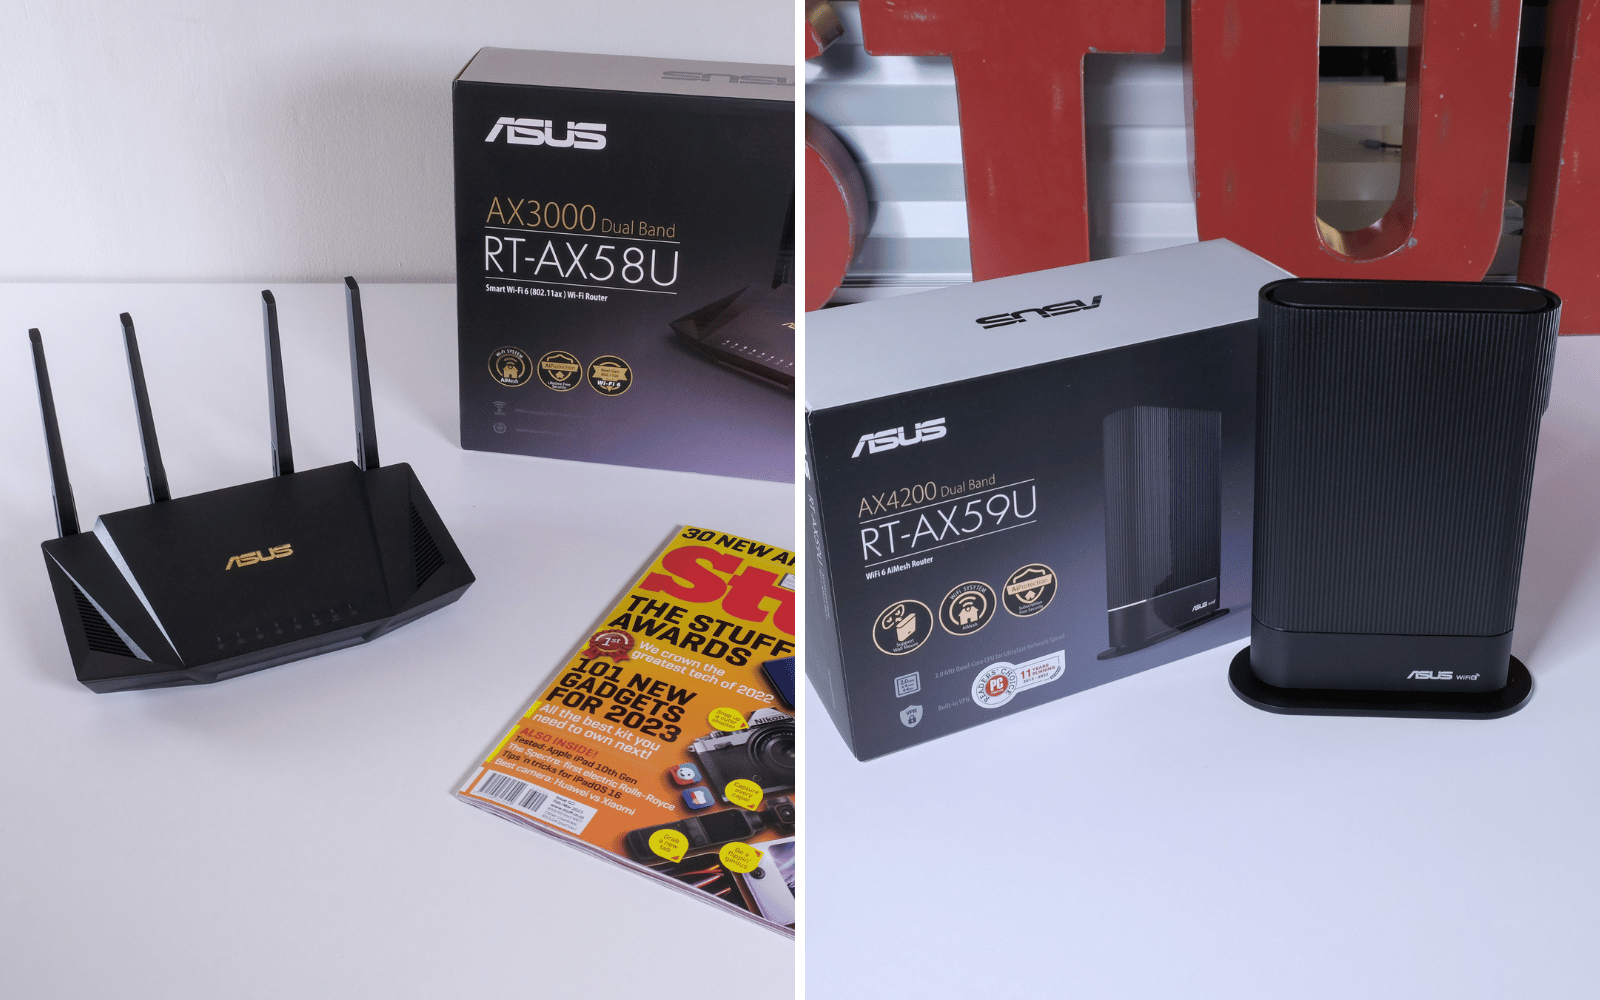 Asus 'Extendable Router' Review: A DIY Mesh Network - Stuff South